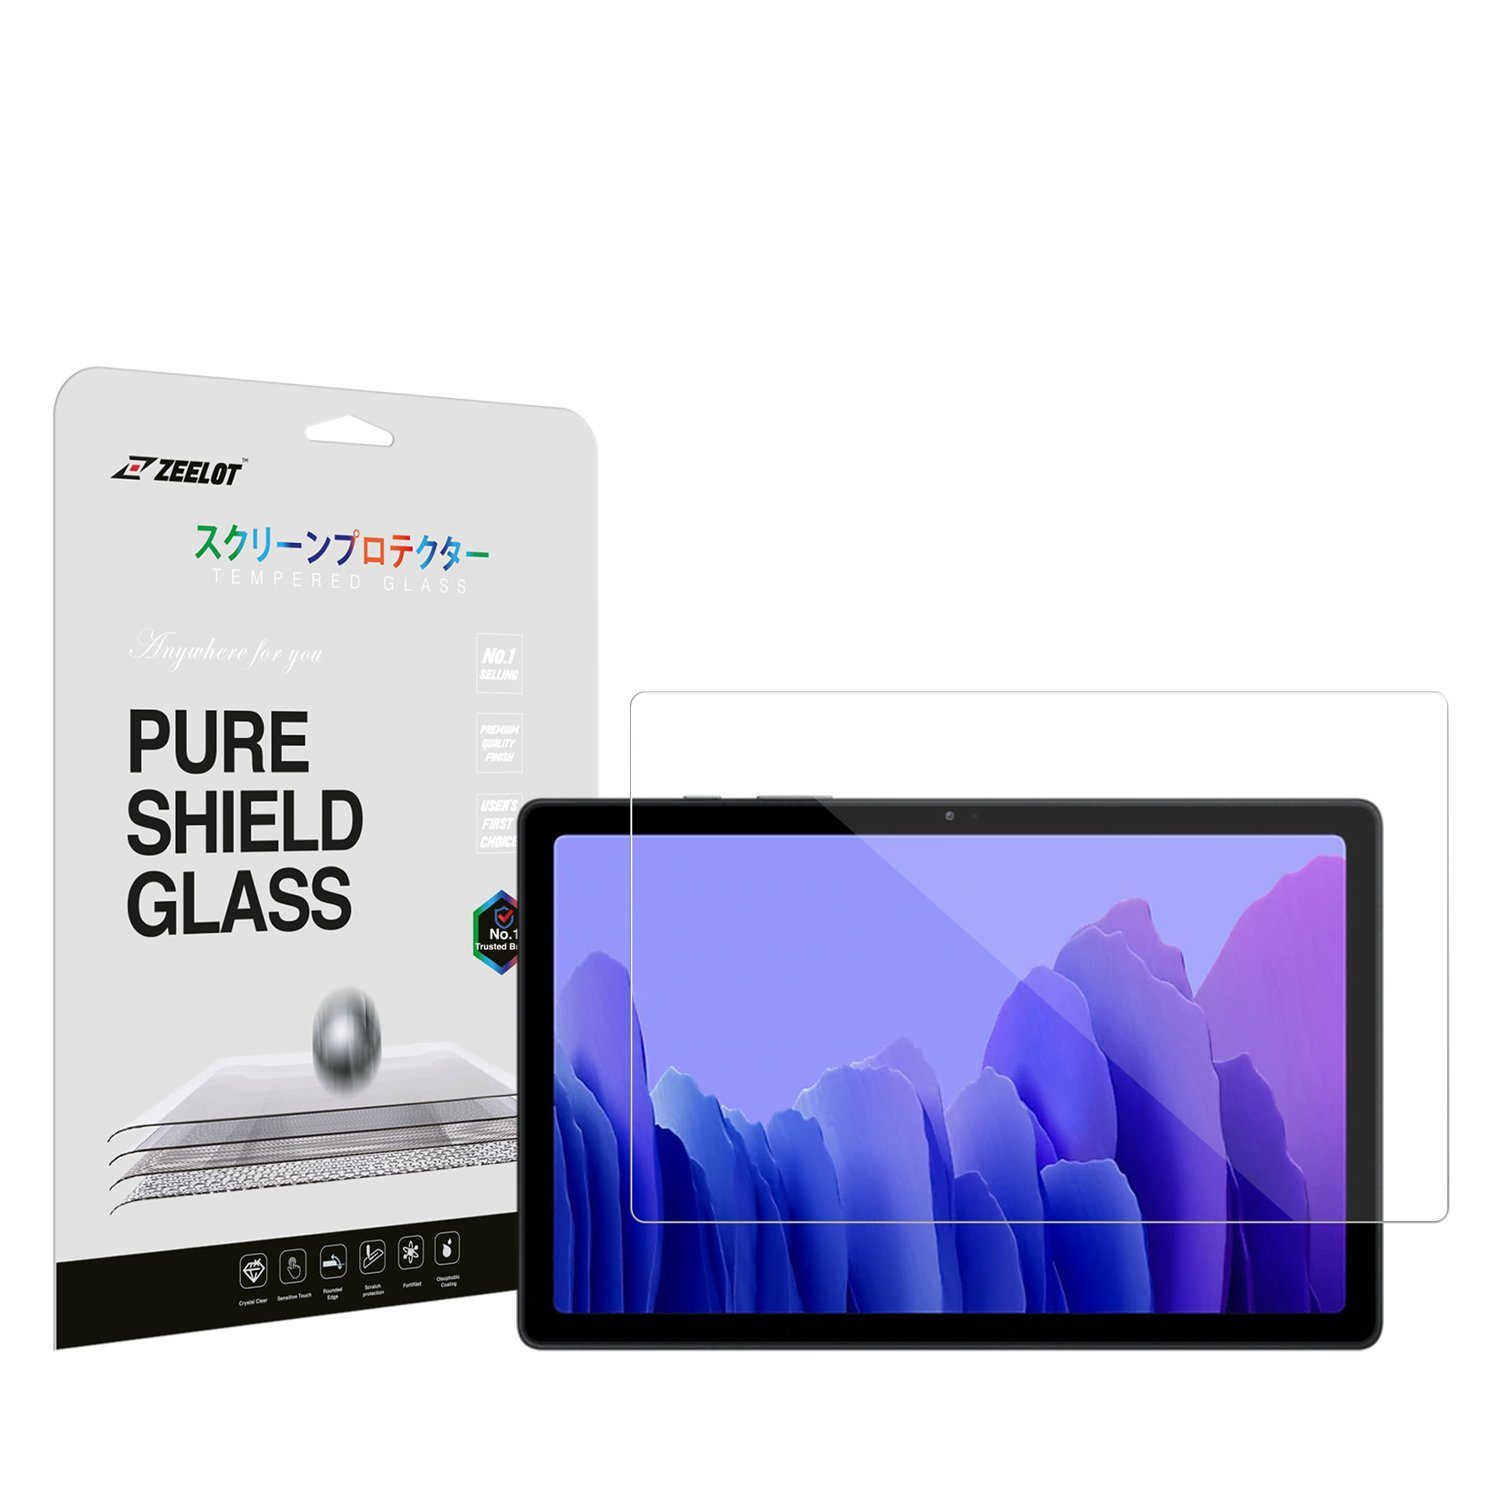 ZEELOT PureShield 2.5D Clear Tempered Glass Screen Protector for Samsung Galaxy Tab A7(2020) Tab A7 Zeelot 